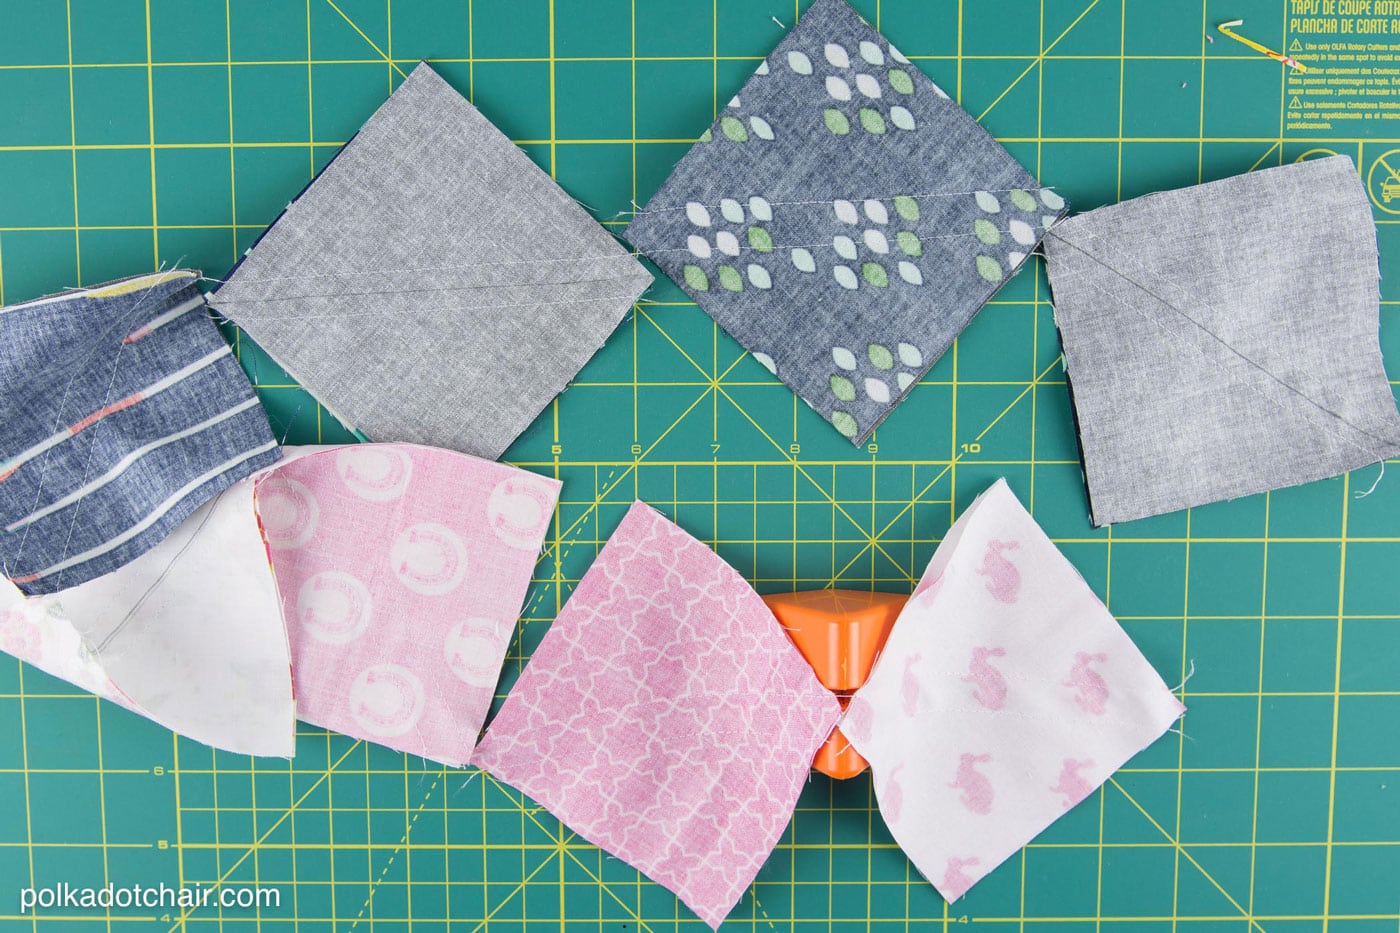 Tips and tricks to help you when you're constructing quilt blocks. Things like how to stay organized and how to trim HST blocks accurately.